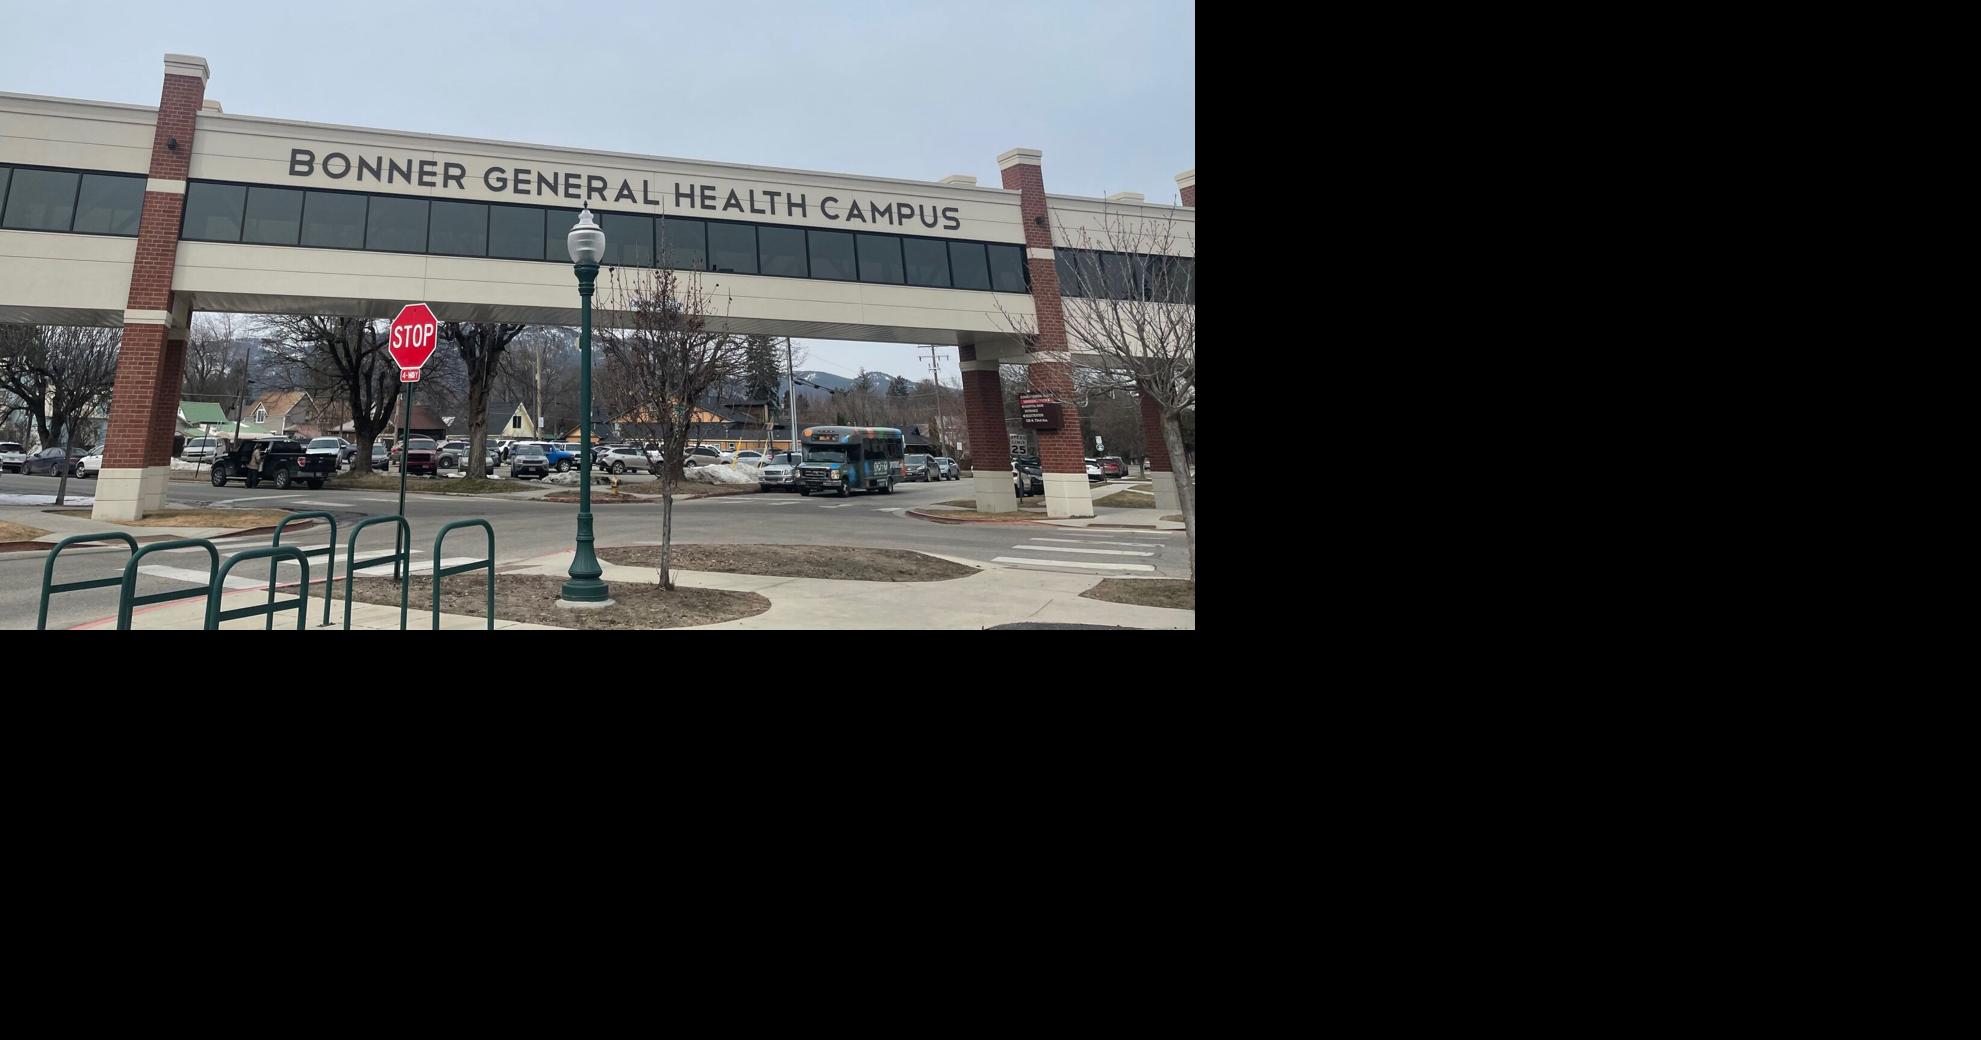 Idaho health laws cause doctors to leave Bonner General, causing obstetrics unit closure